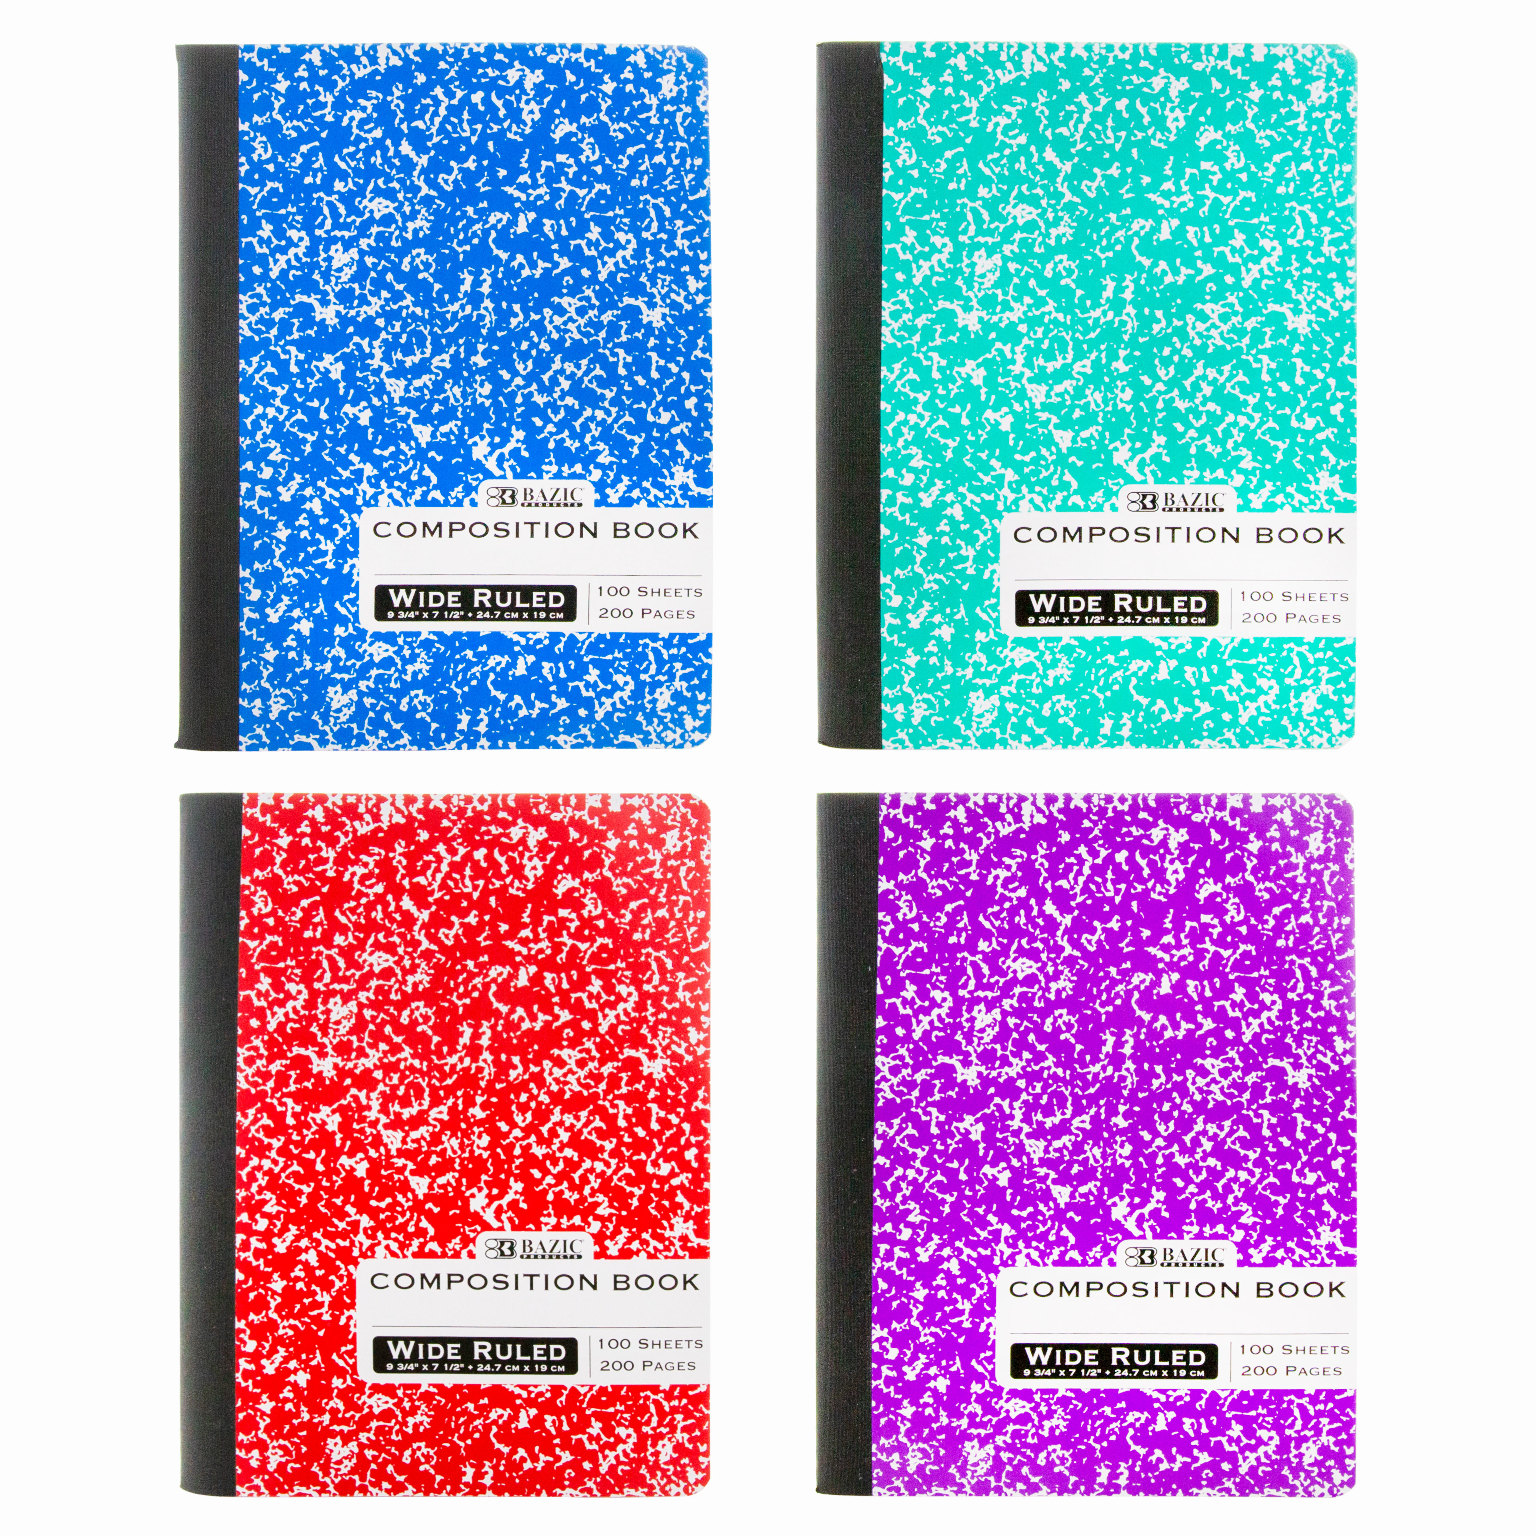 LOT OF 6 BAZIC COMPOSITION WIDE RULED BOOK SCHOOL HOMEWORK NOTEBOOKS 100 SHEETS 